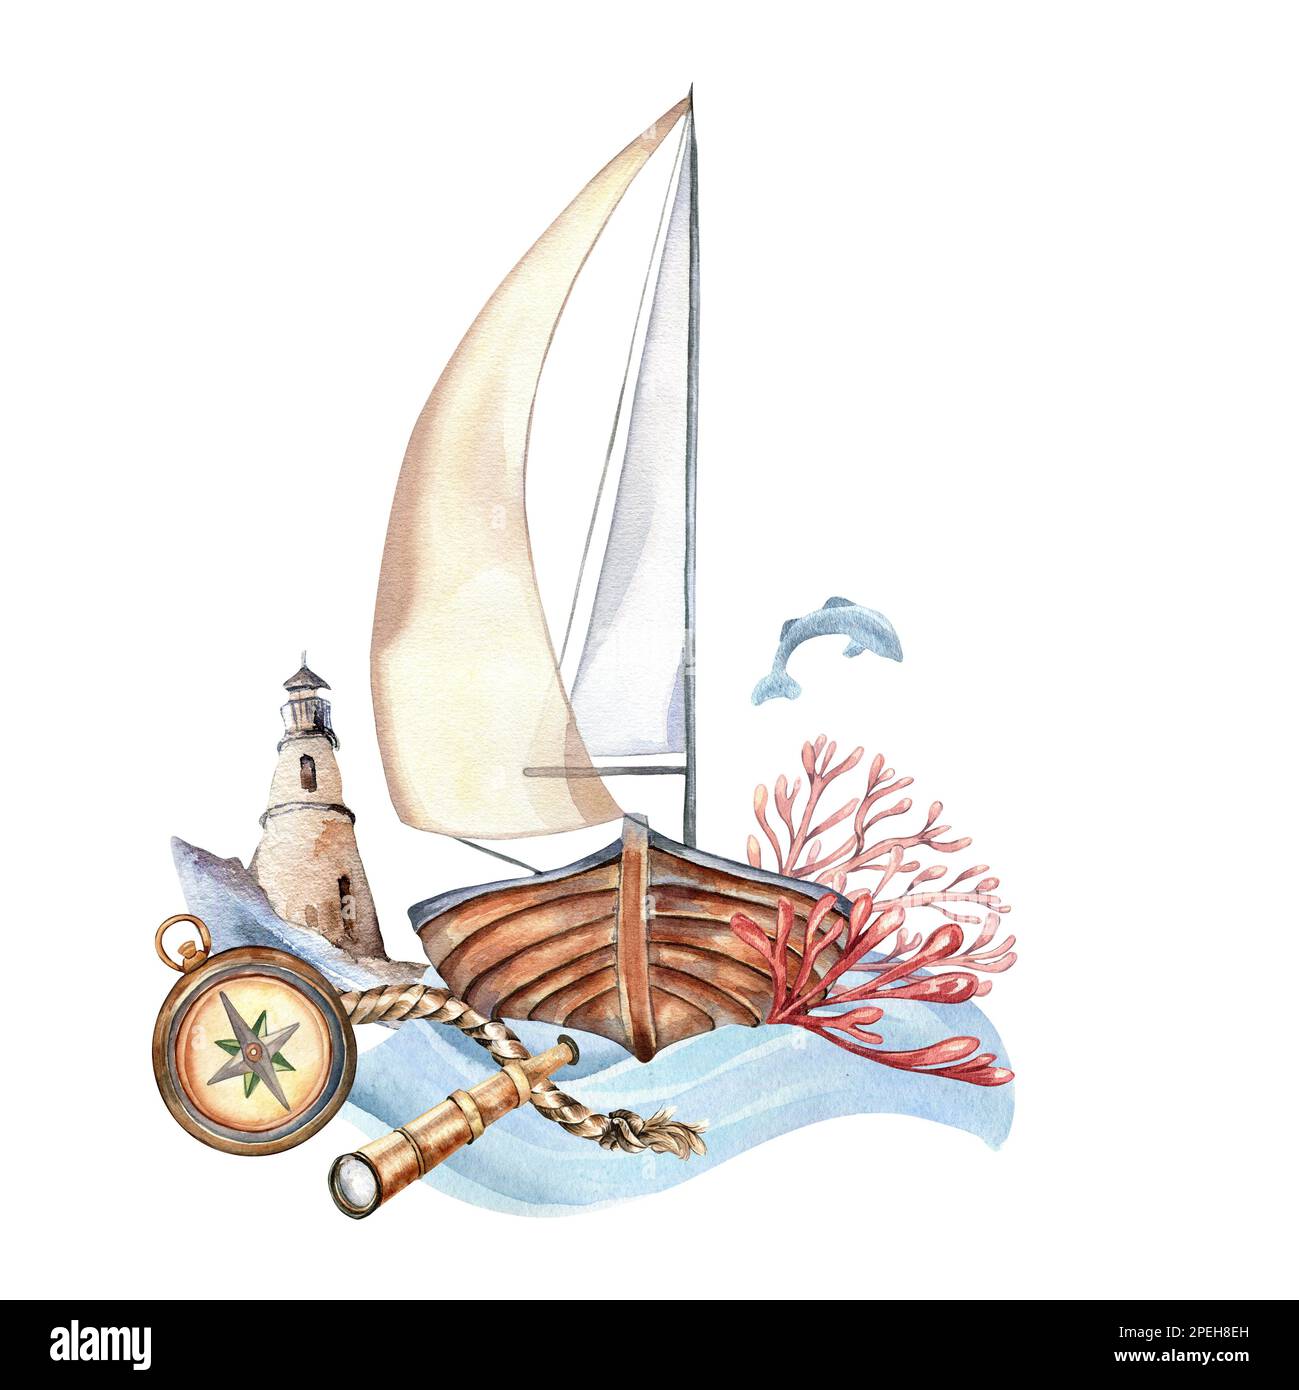 Composition of sailboat vintage style watercolor illustration isolated on white. Ship, vessel on waves, coral, fish, compass hand drawn. Childish desi Stock Photo